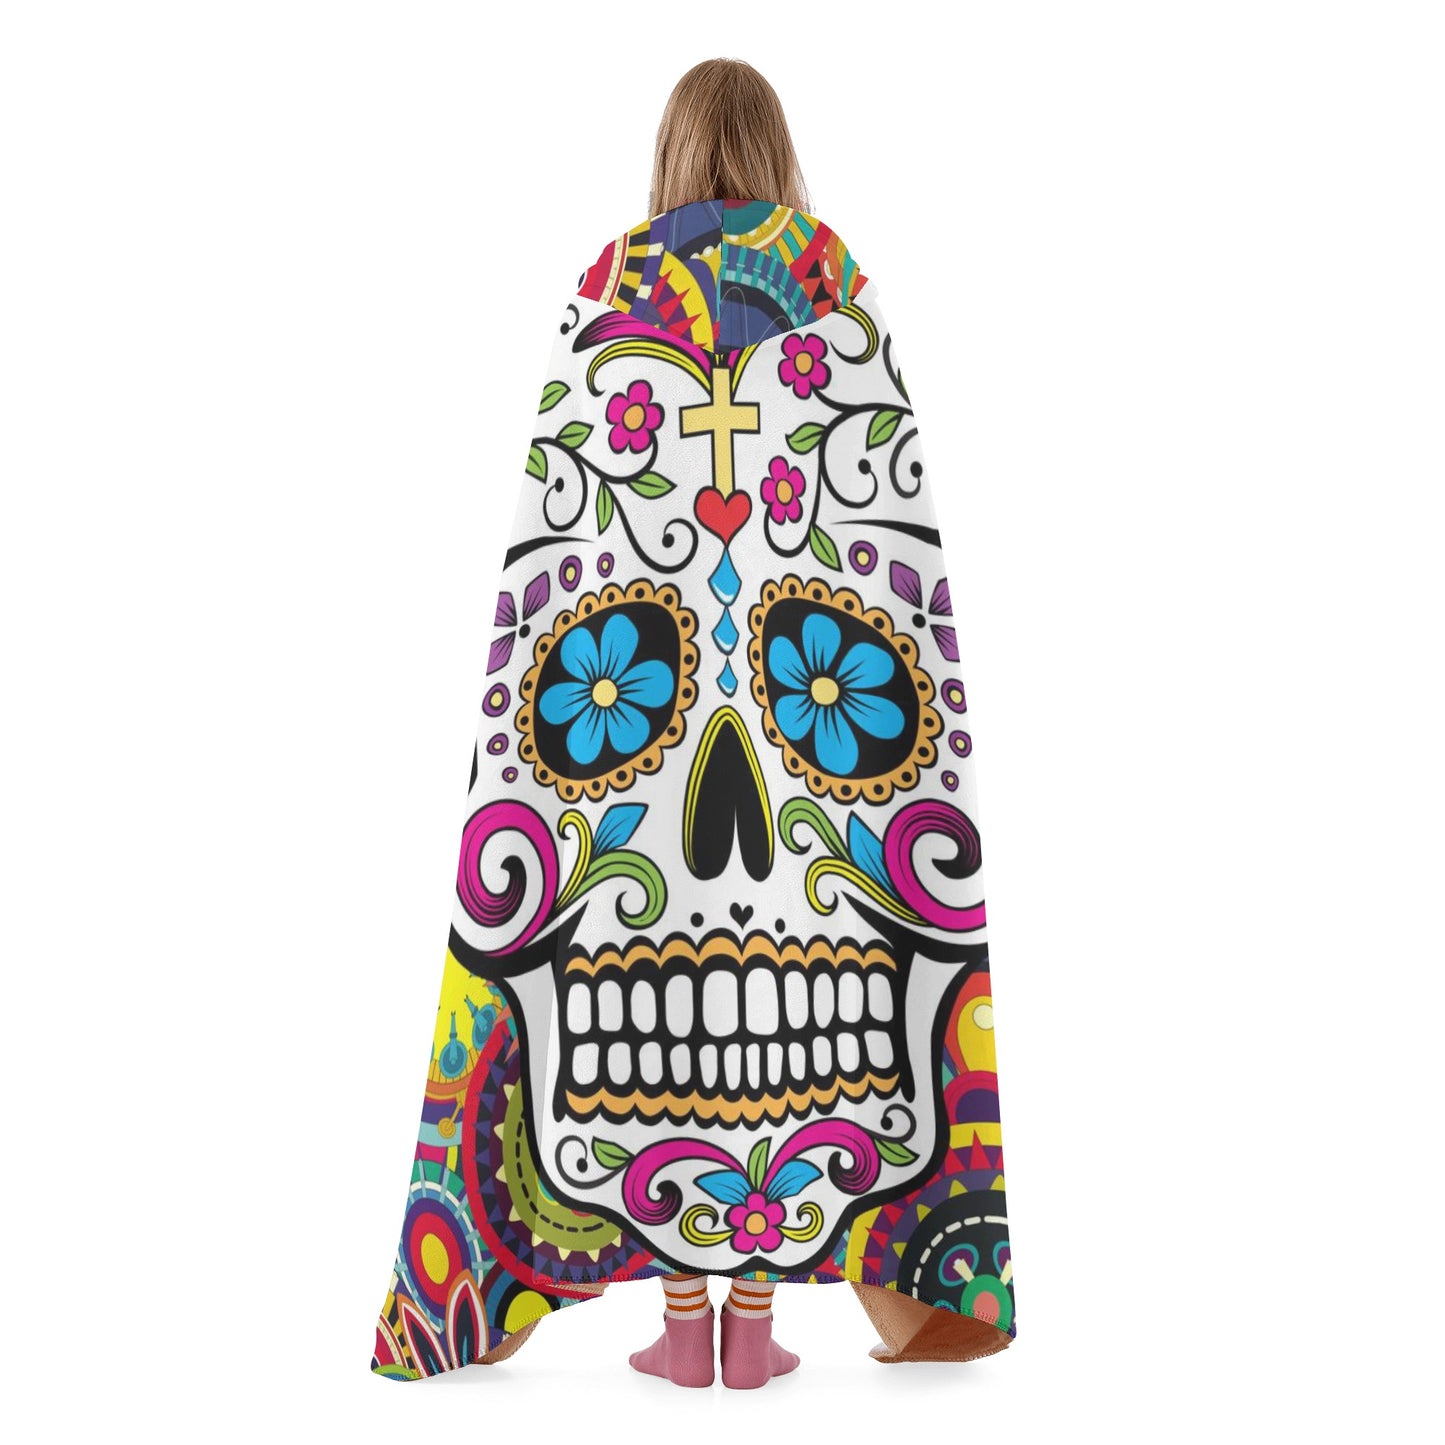 Floral day of the dead Hooded Blanket